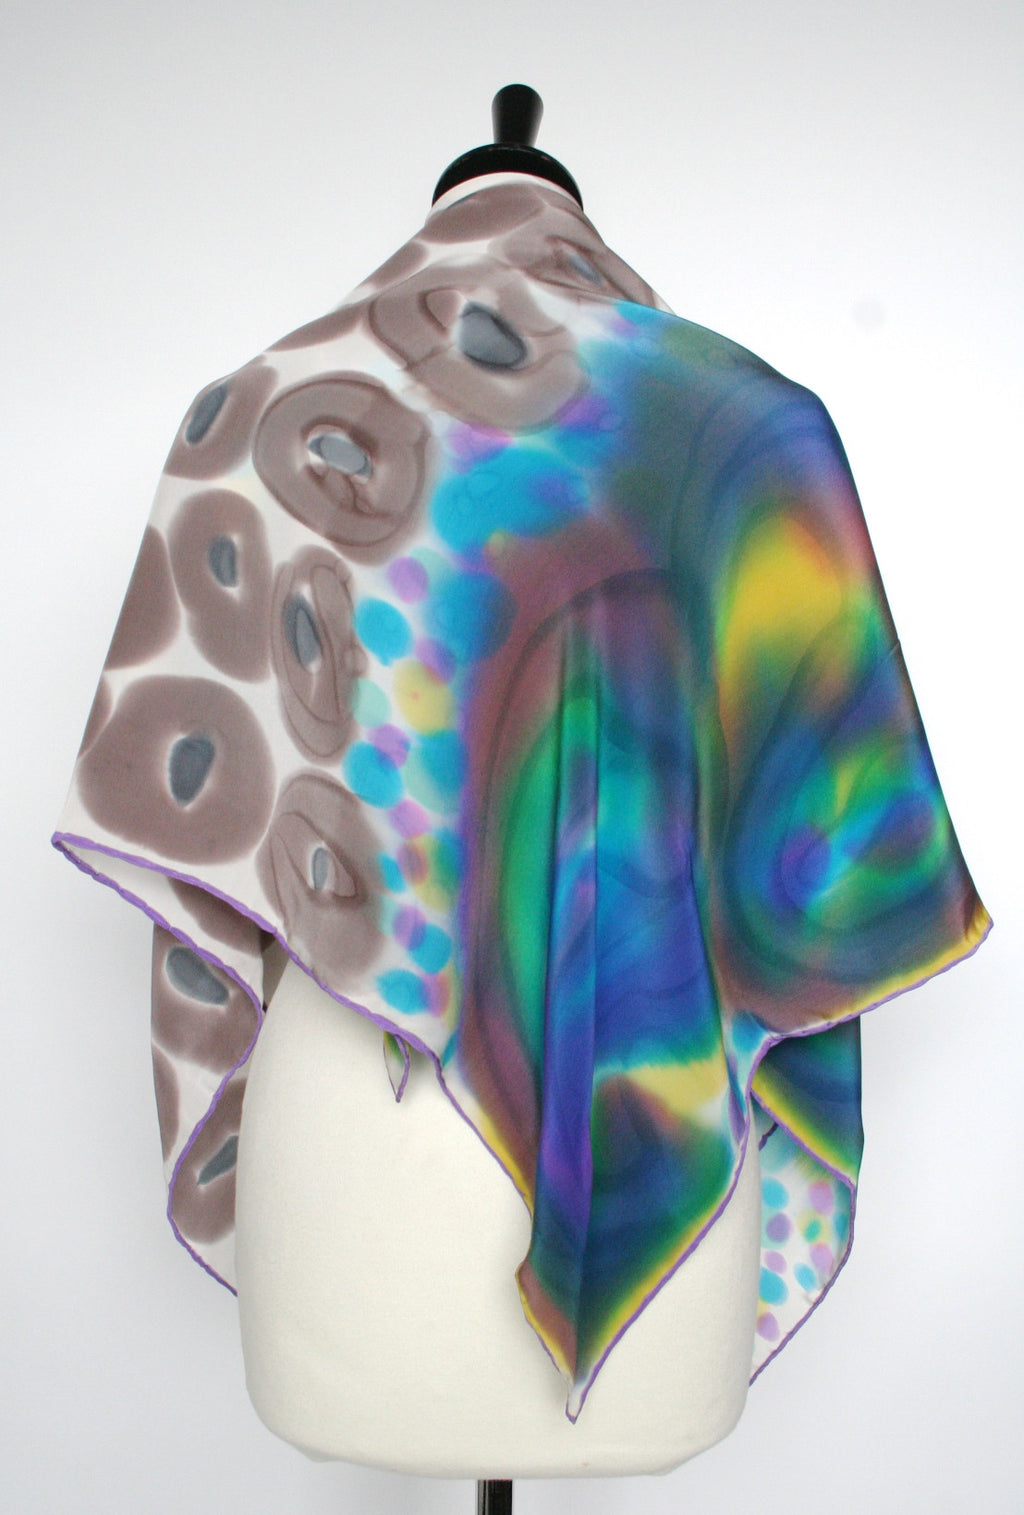 Louis Feraud 1970's Hand Printed Silk Fil Coupe Scarf